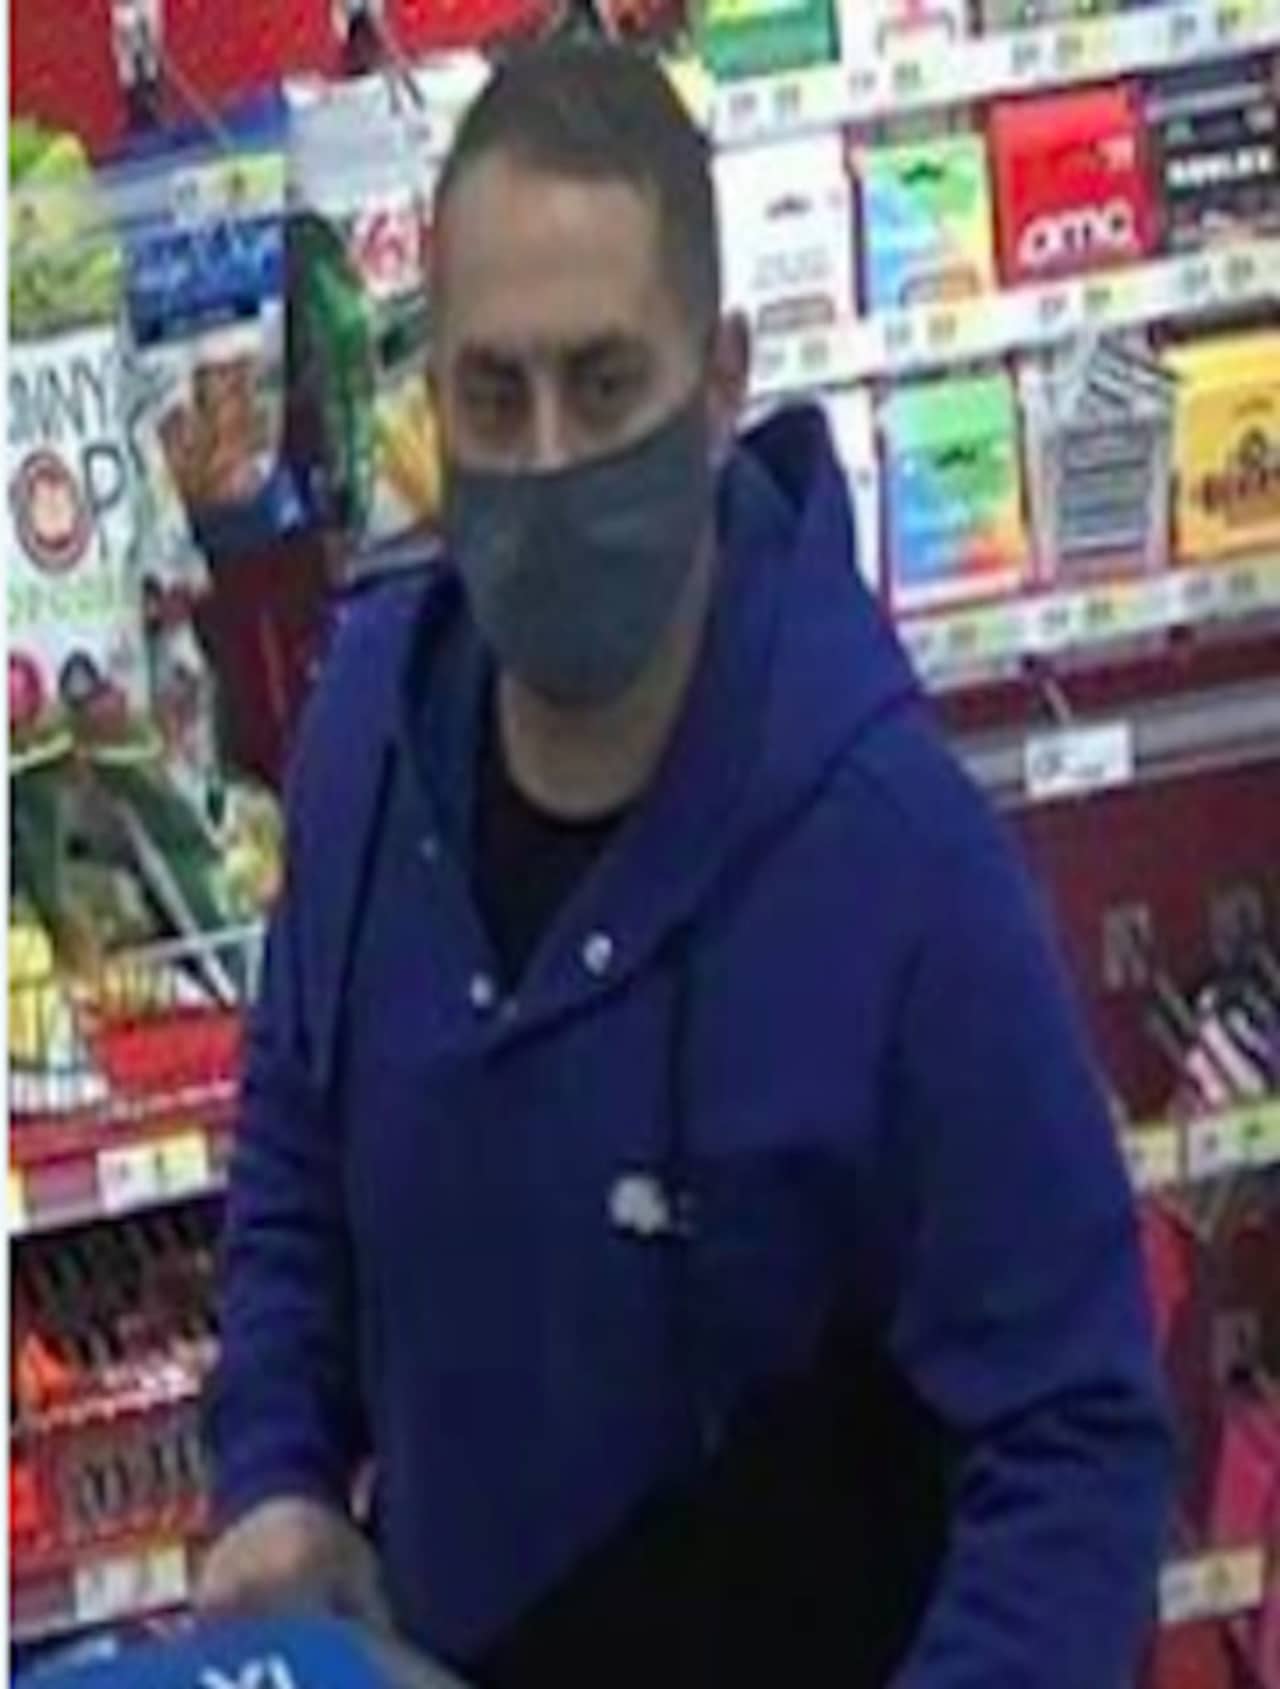 A surveillance image of the wanted man.